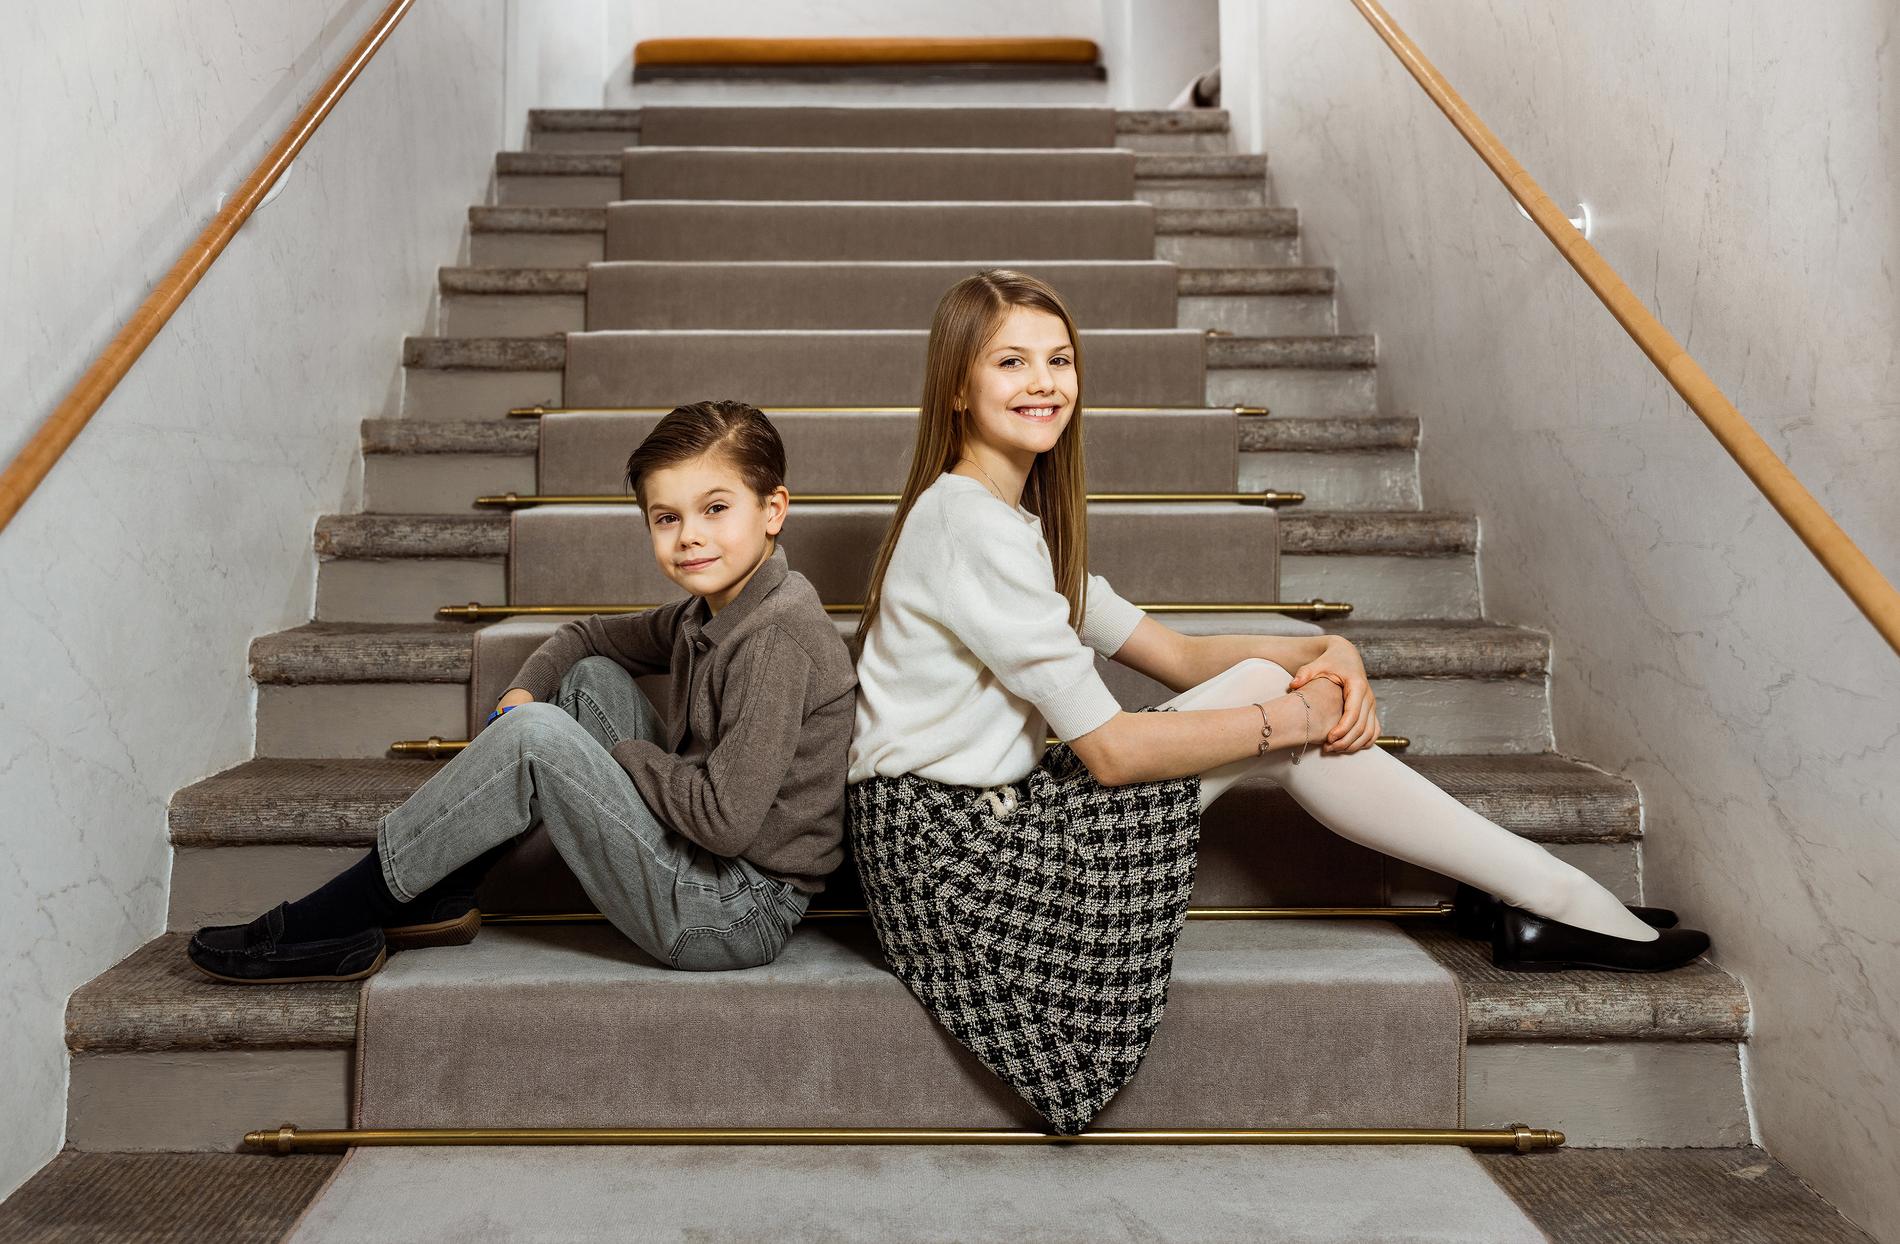 OFFICIAL: Prince Oscar and Princess Estelle pose for a formal and more formal photo shoot from the Swedish Royal House this spring.